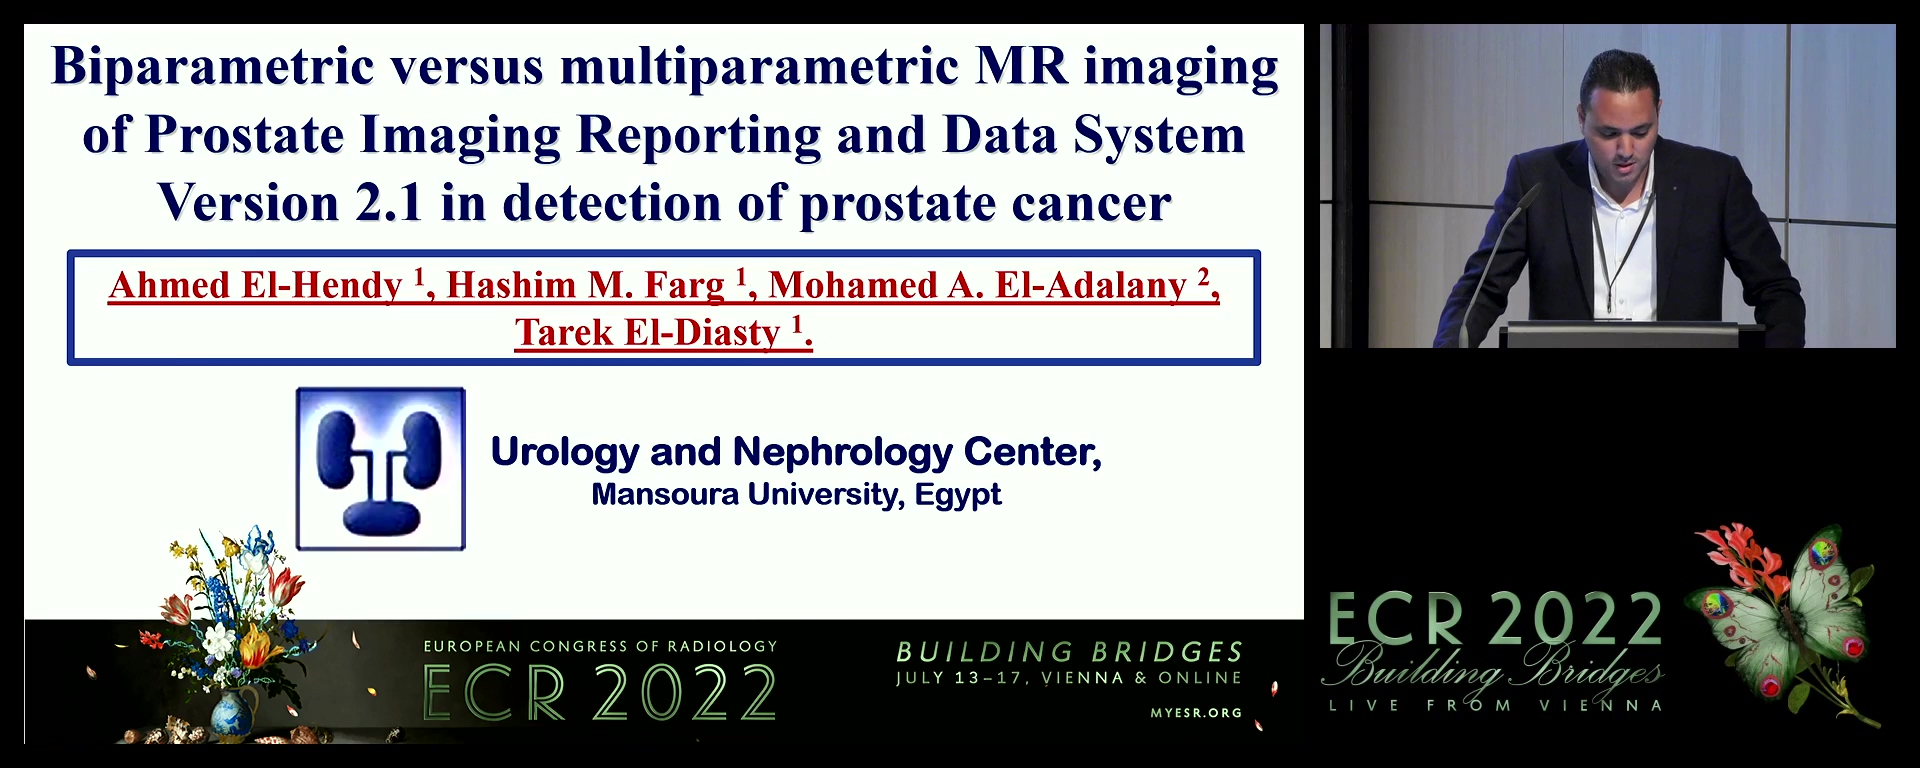 Biparametric versus multiparametric MR imaging of prostate imaging reporting and data system version 2.1 in detection of prostate cancer